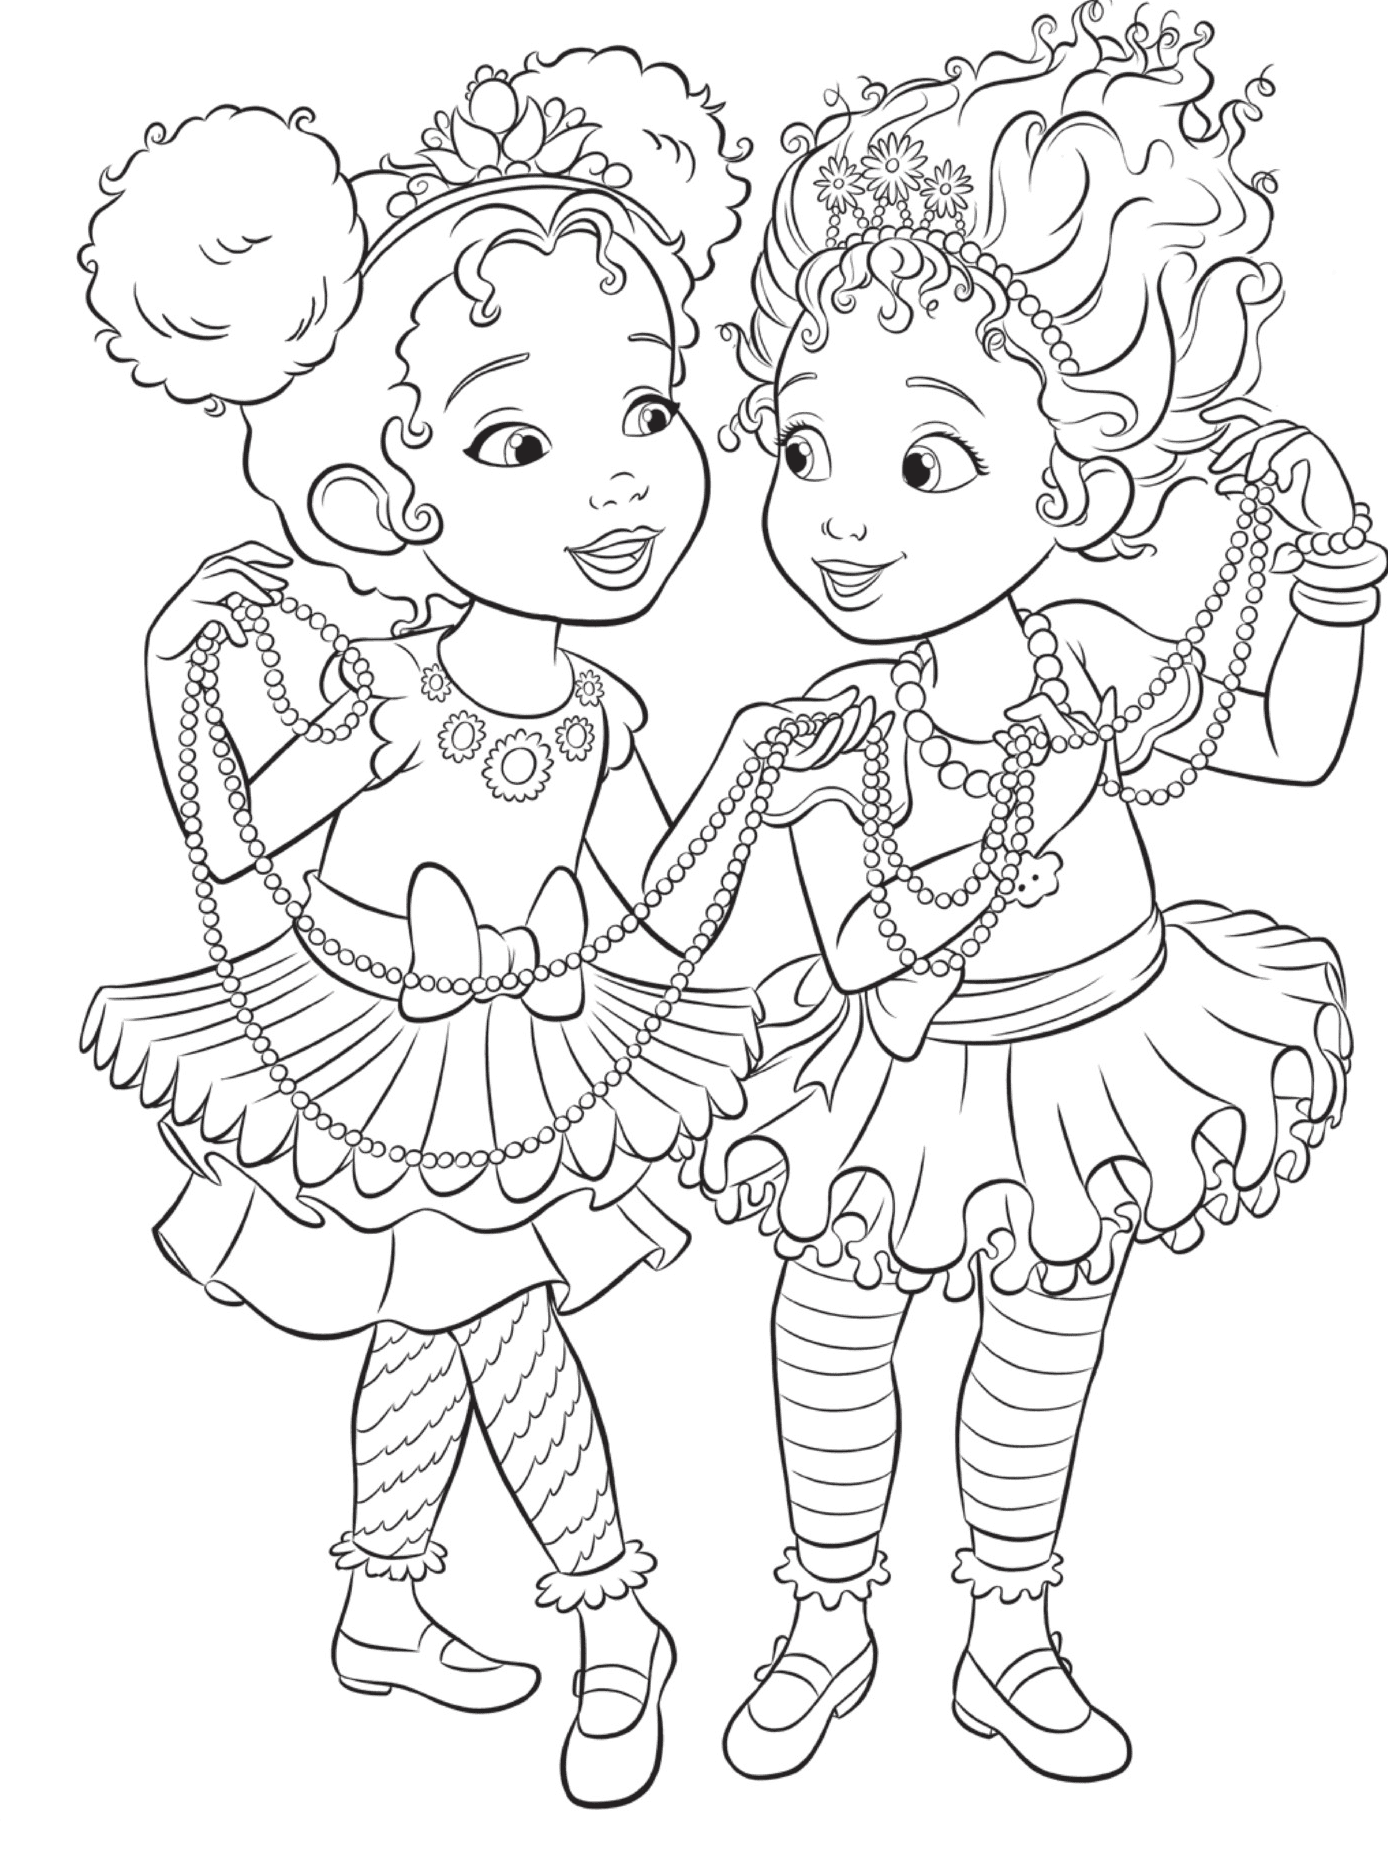 Fancy Nancy Coloring Pages - Coloring Pages For Kids And Adults